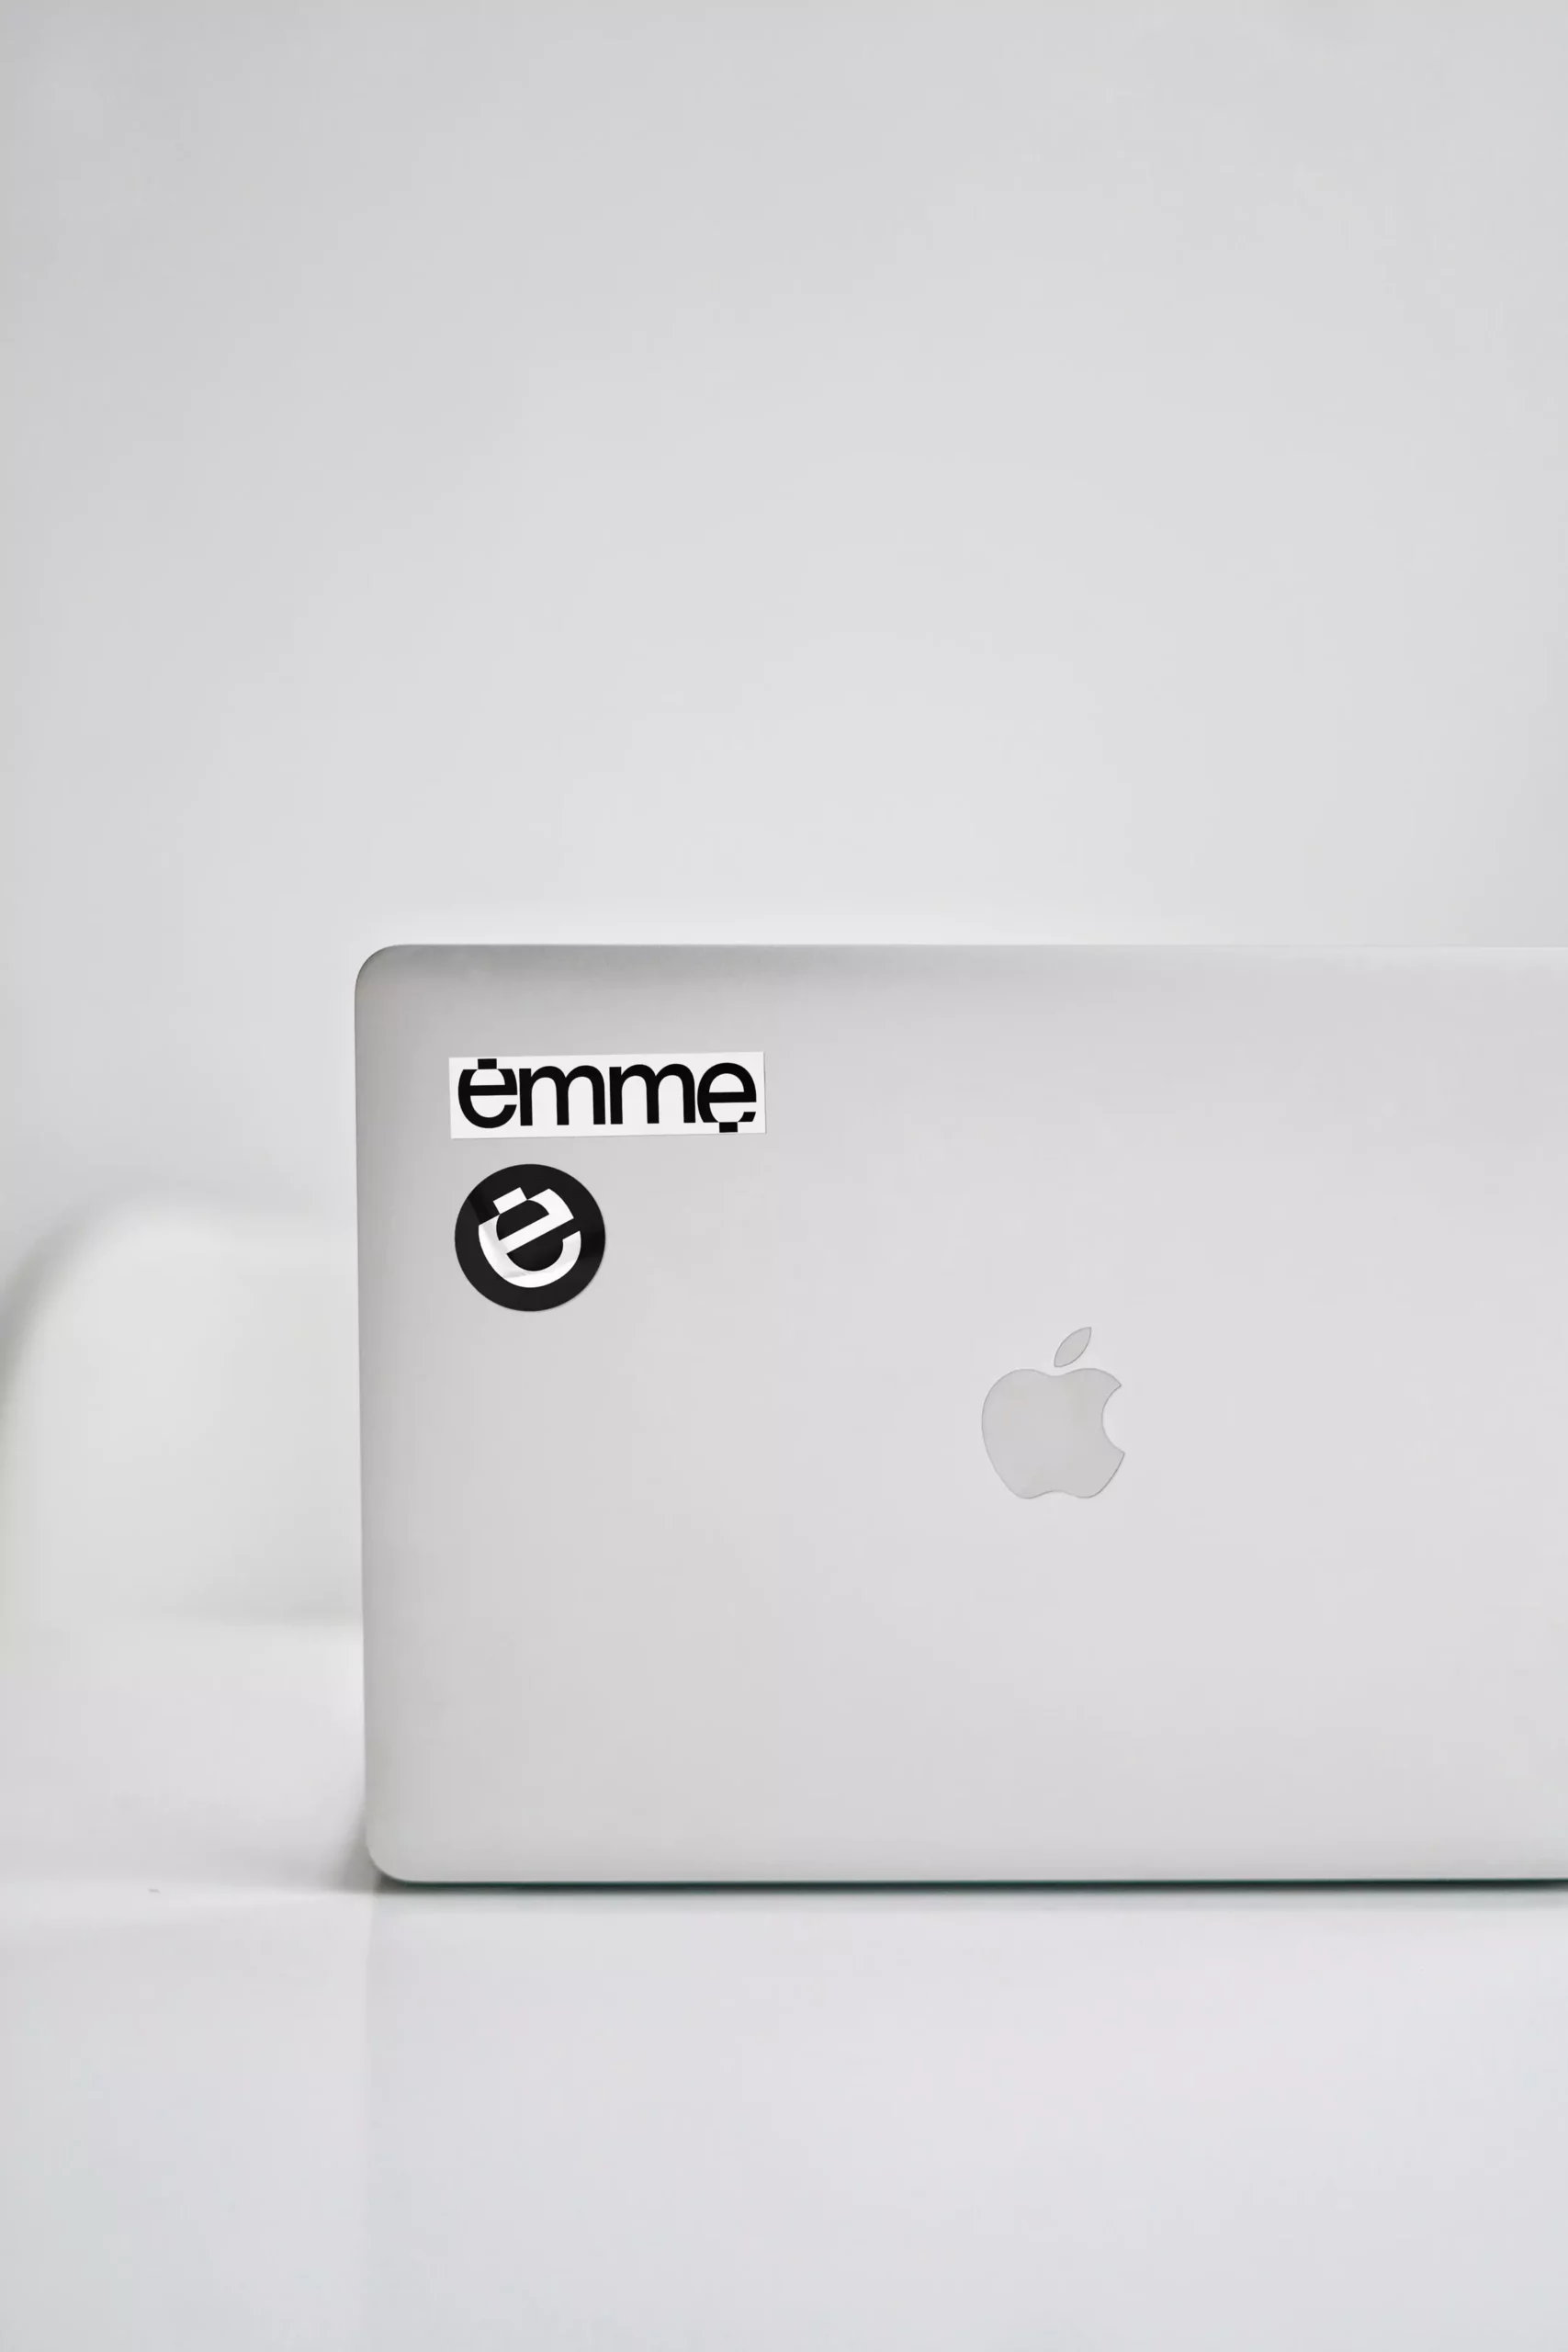 Visual Identity for Emme - Stickers on Macbook